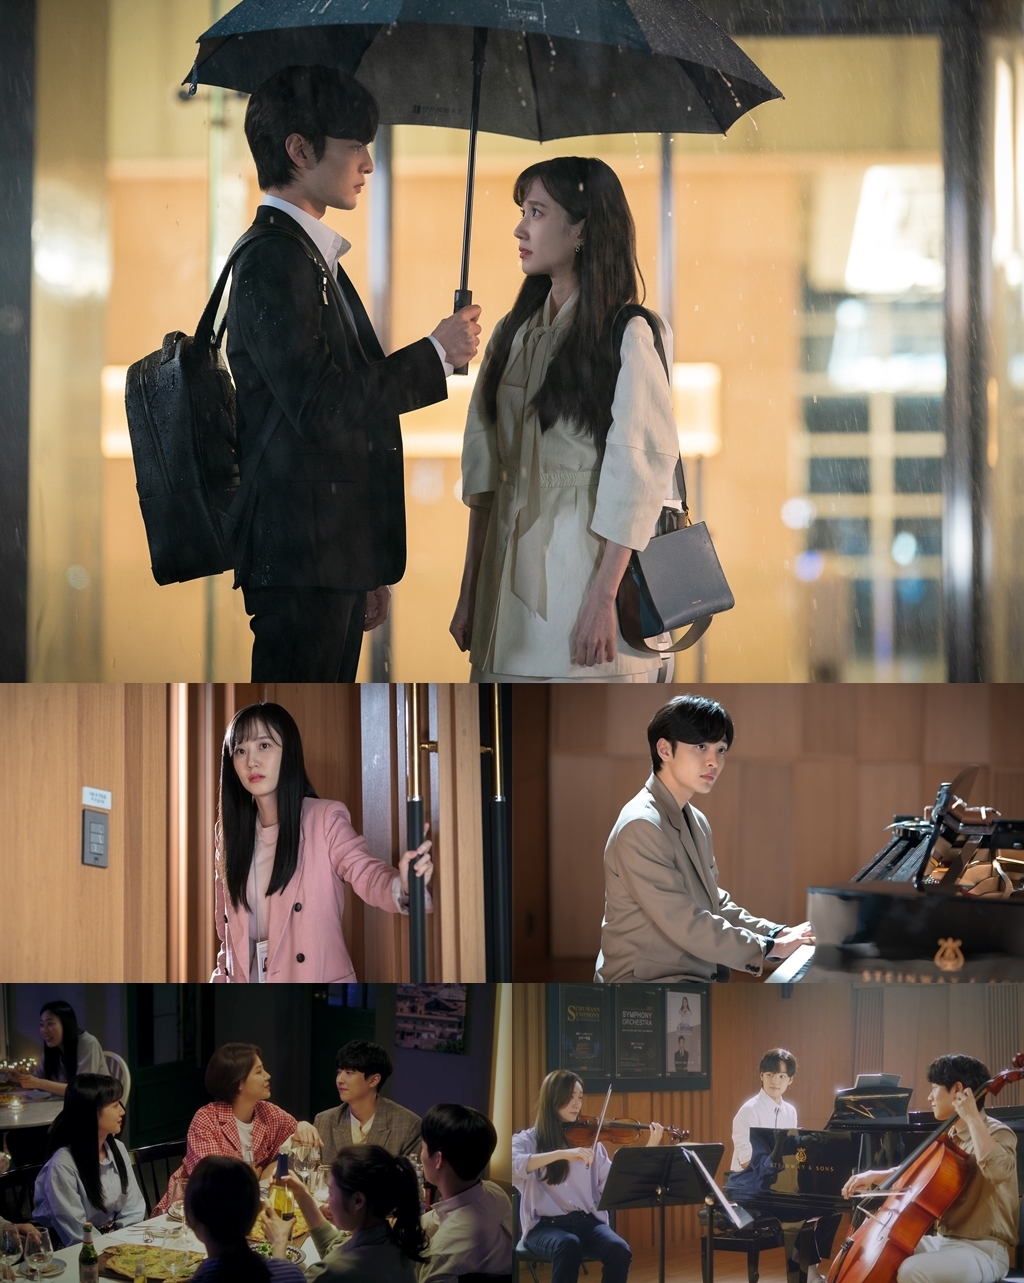 Seoul = = Do you like Brahms? The Classic emotional romance comes.SBS New Moonhwa Drama Do you like Brahms scheduled to be broadcasted at 10 pm on the 31st? (playwright Ryuborg/directed Cho Young-min/production studio S) tells the story of the breathtaking dreams and love of The Classic Music students on the Twinty-nine boundary.Before the first broadcast, I looked at the observation point to shoot the emotions of the audience in the house theater.Park Eun-bin X Kim Min-jae, Music to Foreshadow Life Character TransformationDrama Stobrig Park Eun-bin and Romantic Doctor Kim Sabu 2 Kim Min-jae, who decorated the first half of this year, united.Park Eun-bin is a music student who is full of passion for violin but lacks talent. Kim Min-jae is transformed into a famous pianist Park Jun-young, who won the second place in the Chopin International Piano Competition for the first time in Korea.The two actors have been working on musical instrument practice since the casting, and predicted playing activities to add immersion.It is expected that the two actors who will lead the drama with deepening emotional acting and the best chemistry are expected.Twenty-nine, a story full of empathy, I wanted to be comforted a littleDo you like Brahms? Is a story that anyone who has encountered the gap between dreams and reality can sympathize with while dealing with the world of The Classic Musicians.The drama of the nine main characters, who love something and someone hard, will be unfolded hotly, and it is a drama that touches the empathy and memories of those who have passed that time.The Classic + OST Music Feast, already booked Gyeongho River DramaThe Classic Music, which flows according to the emotions and situations of the main characters in the drama, will add rich sensitivity to the drama.In the teaser and highlights video released earlier, emotional scenes combined with the beautiful The Classic melody have already created enthusiastic fans.It is already attracting attention with the lineup of super luxury OSTs including Taeyeon, 10 centimeters, Chen, god, Hayes, and Punch.Between love and friendship, triangular X triangular exciting love lineDrama The title, Do you like Brahms? Is exciting because the long-time unrequited music of Schumanns wife Clara, who was a close colleague, is the motif of Brahms story.The love of characters in the play brings to mind this relationship between Brahms - Schumann - Clara.Triangle x triangular love lines surrounding Park Eun-bin and Kim Min-jae create a romance atmosphere.Kim Min-jae - Kim Sung-chul (played by Han Hyun-ho) - Park Ji-hyun (played by Lee Jung-kyung) and Park Eun-bin - Lee Yu-jin (played by Yoon Dong-yoon) - How the love and friendship between Bae Da-bin (played by Kang Min-sung) will be drawn, can be seen at the First Broadcast Song at 10 p.m. on the 31st.